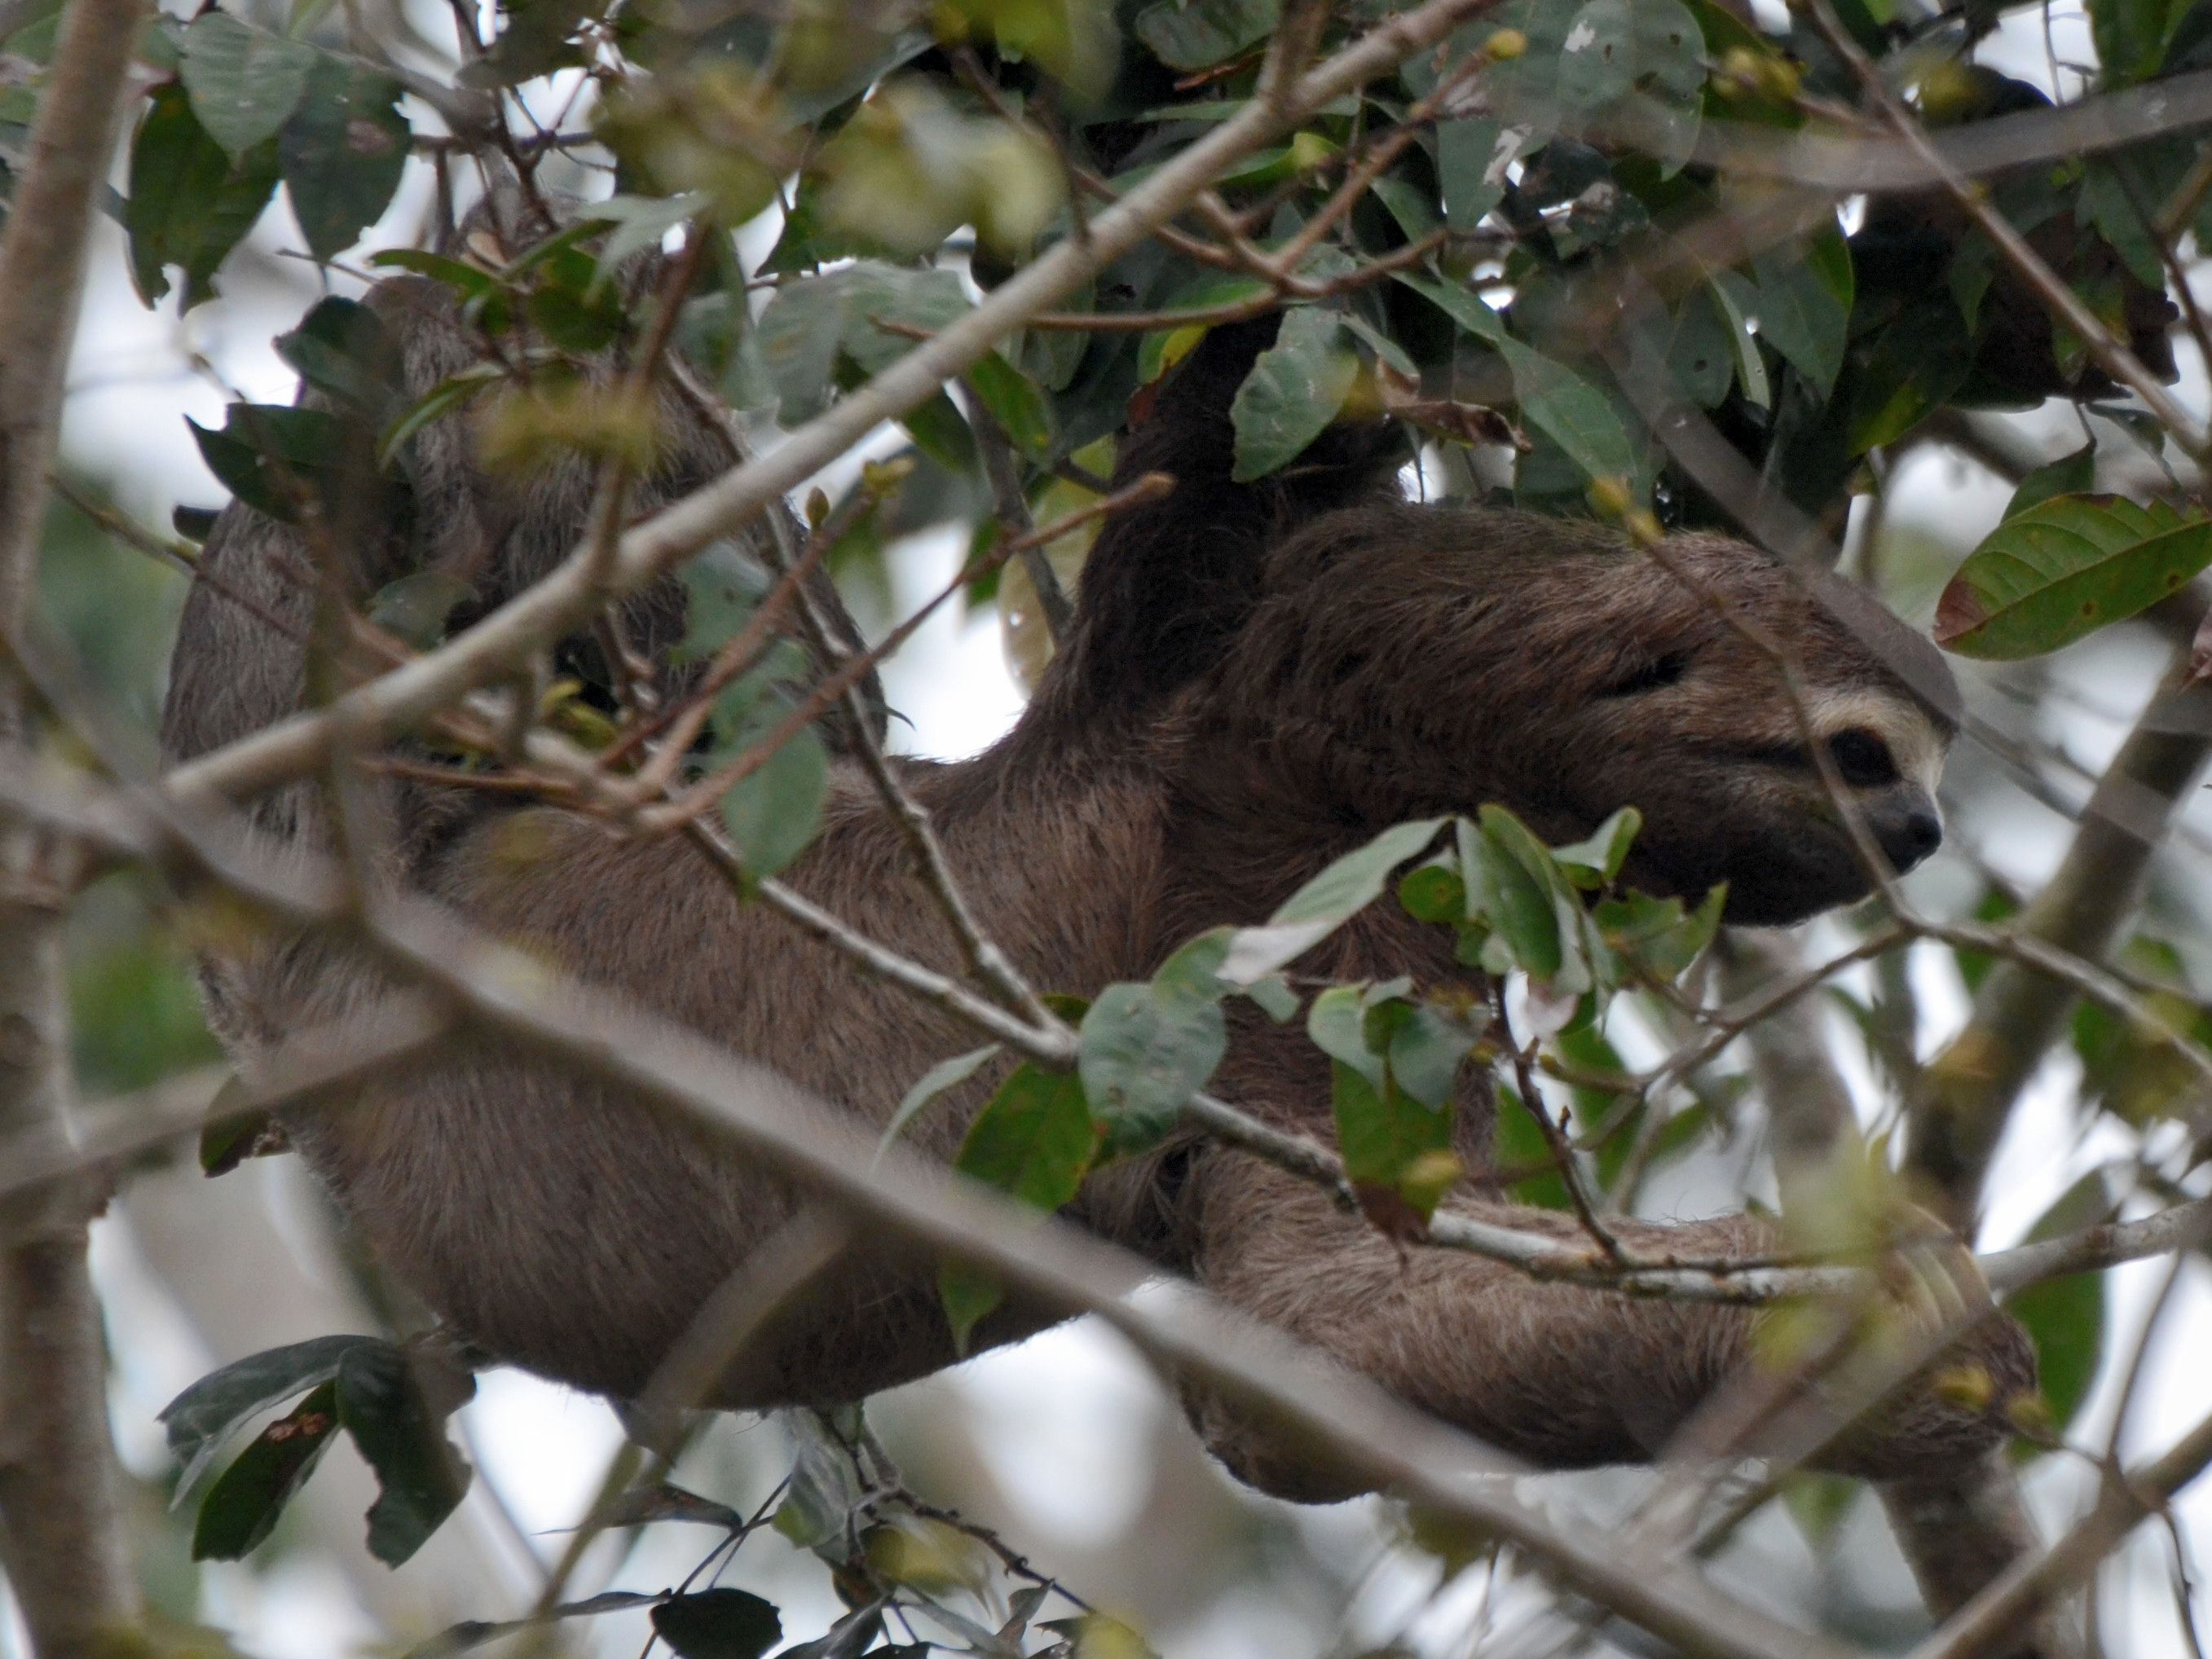 Click picture to see more Brown-throated Three-toed Sloths.